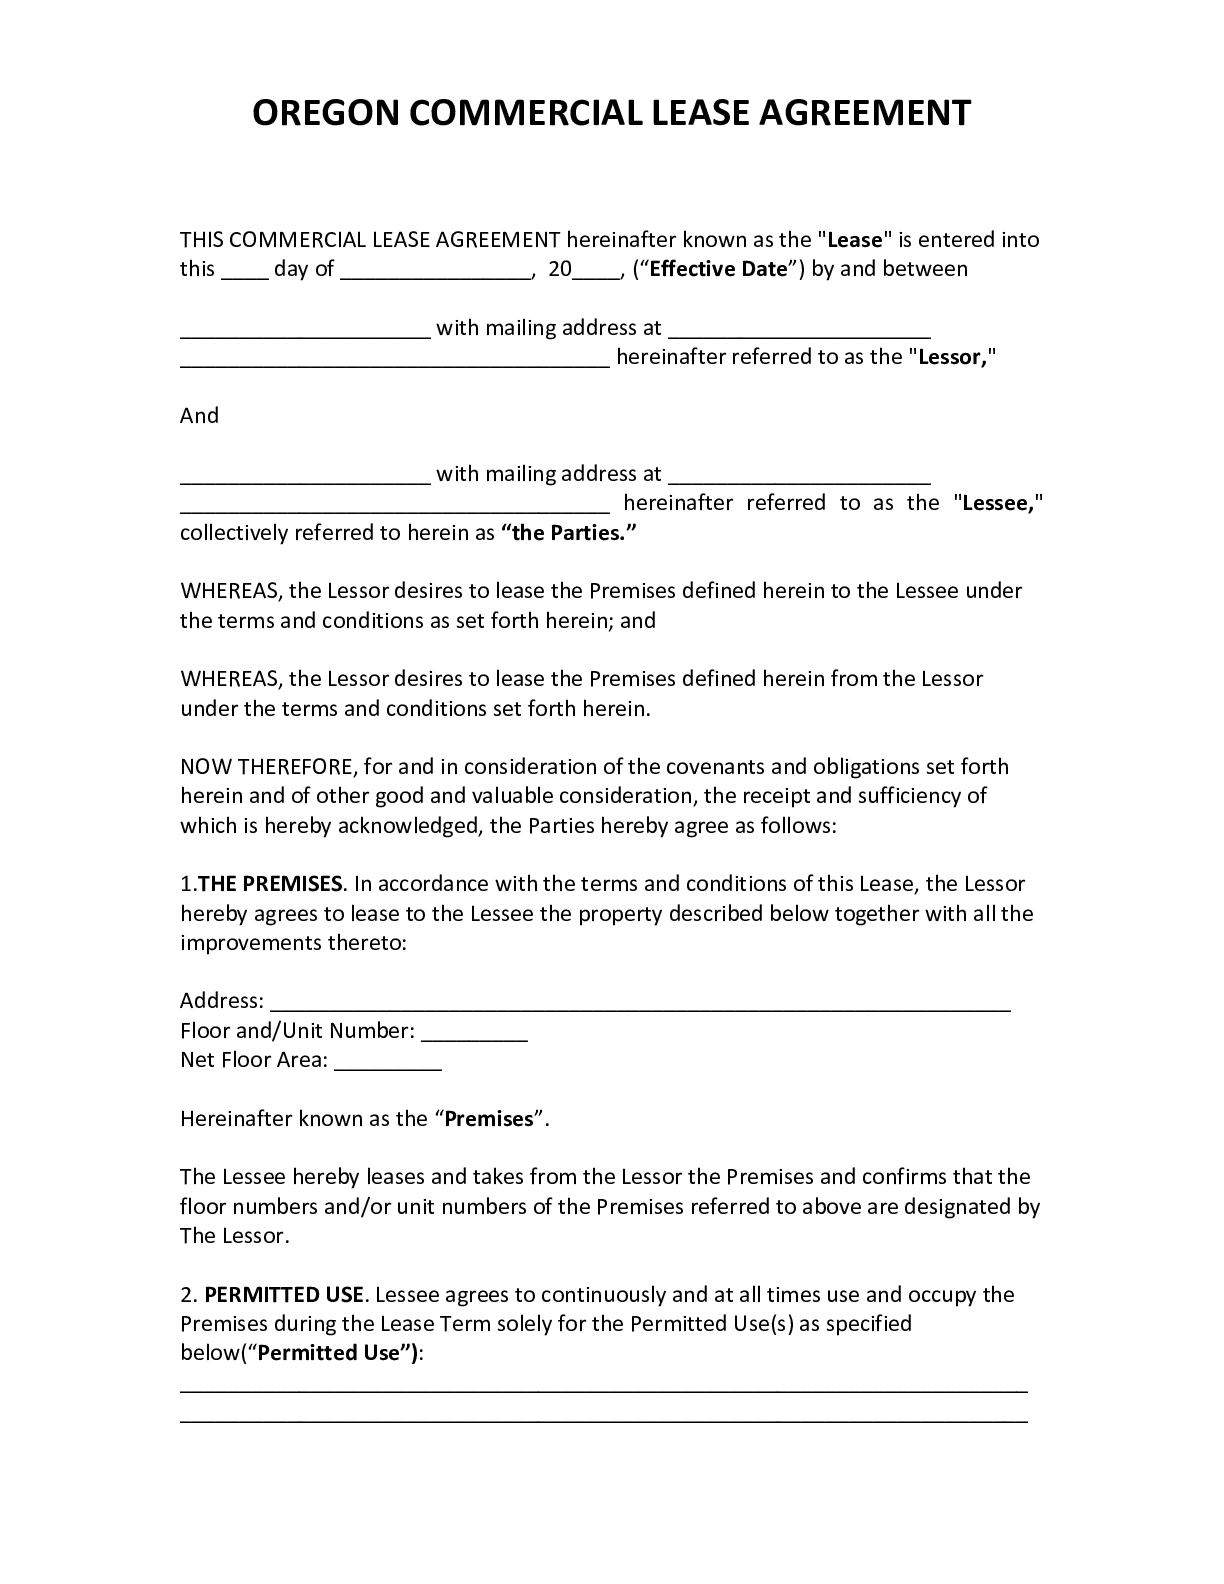 OFFICIAL Oregon Commercial Lease Agreement [2020] PDF Form